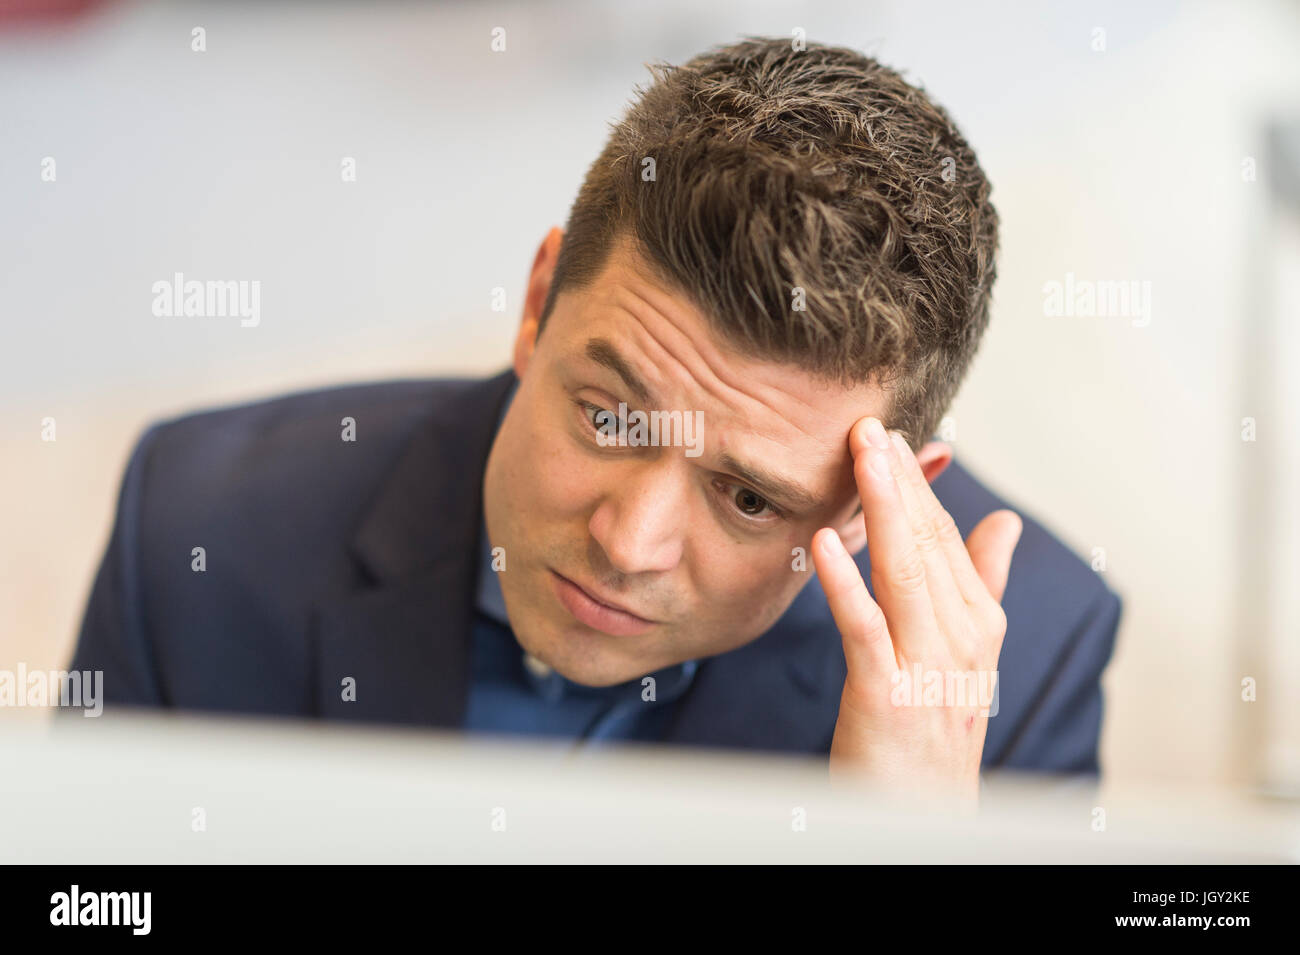 Inquiets businessman looking at computer in office Banque D'Images